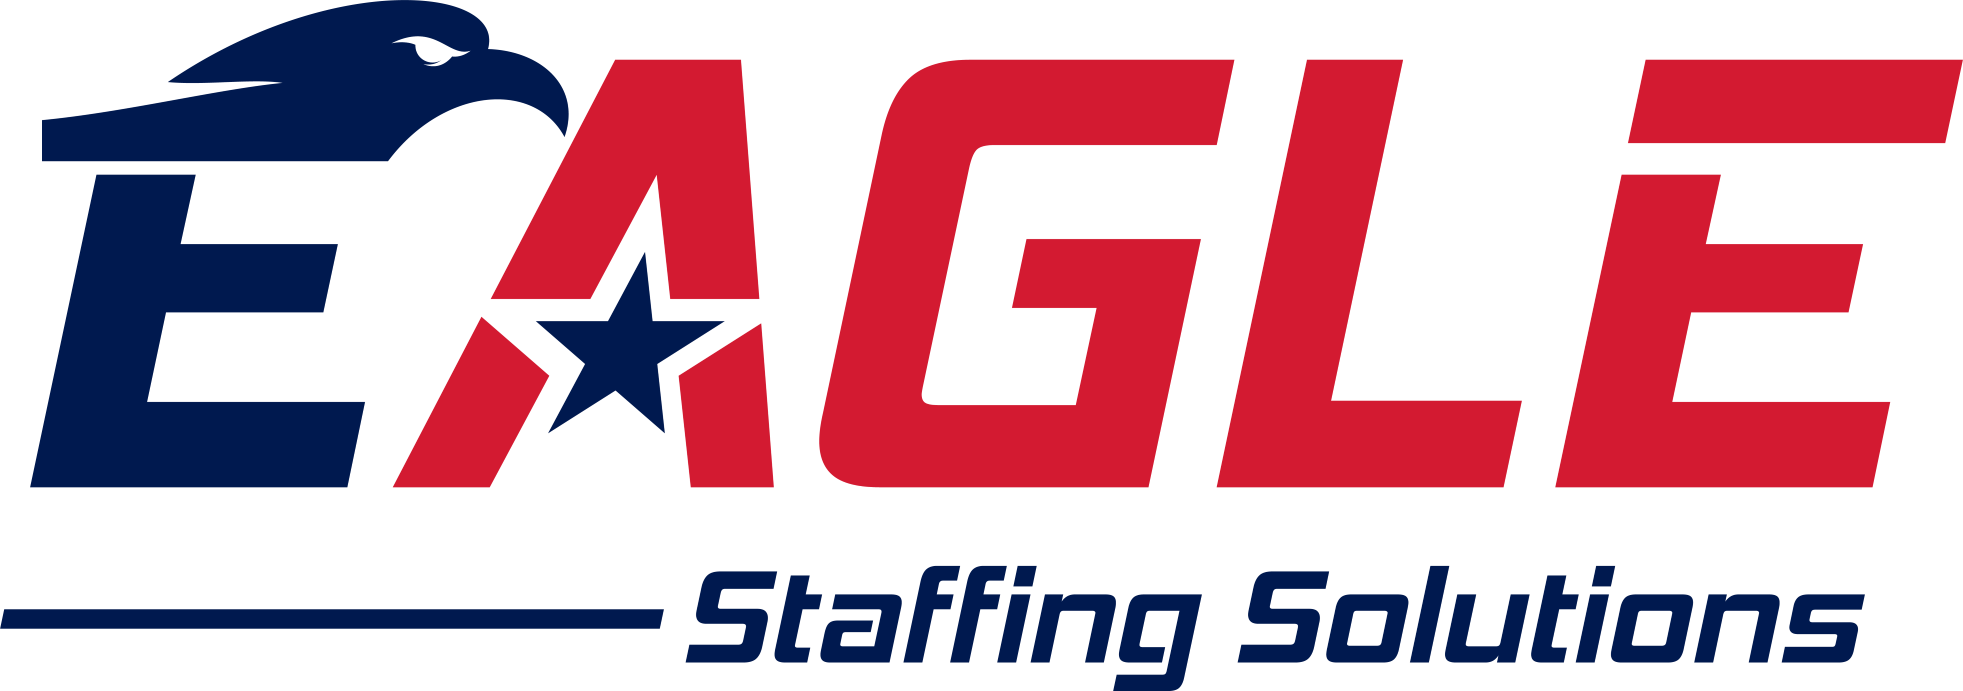 Eagle Staffing Solutions